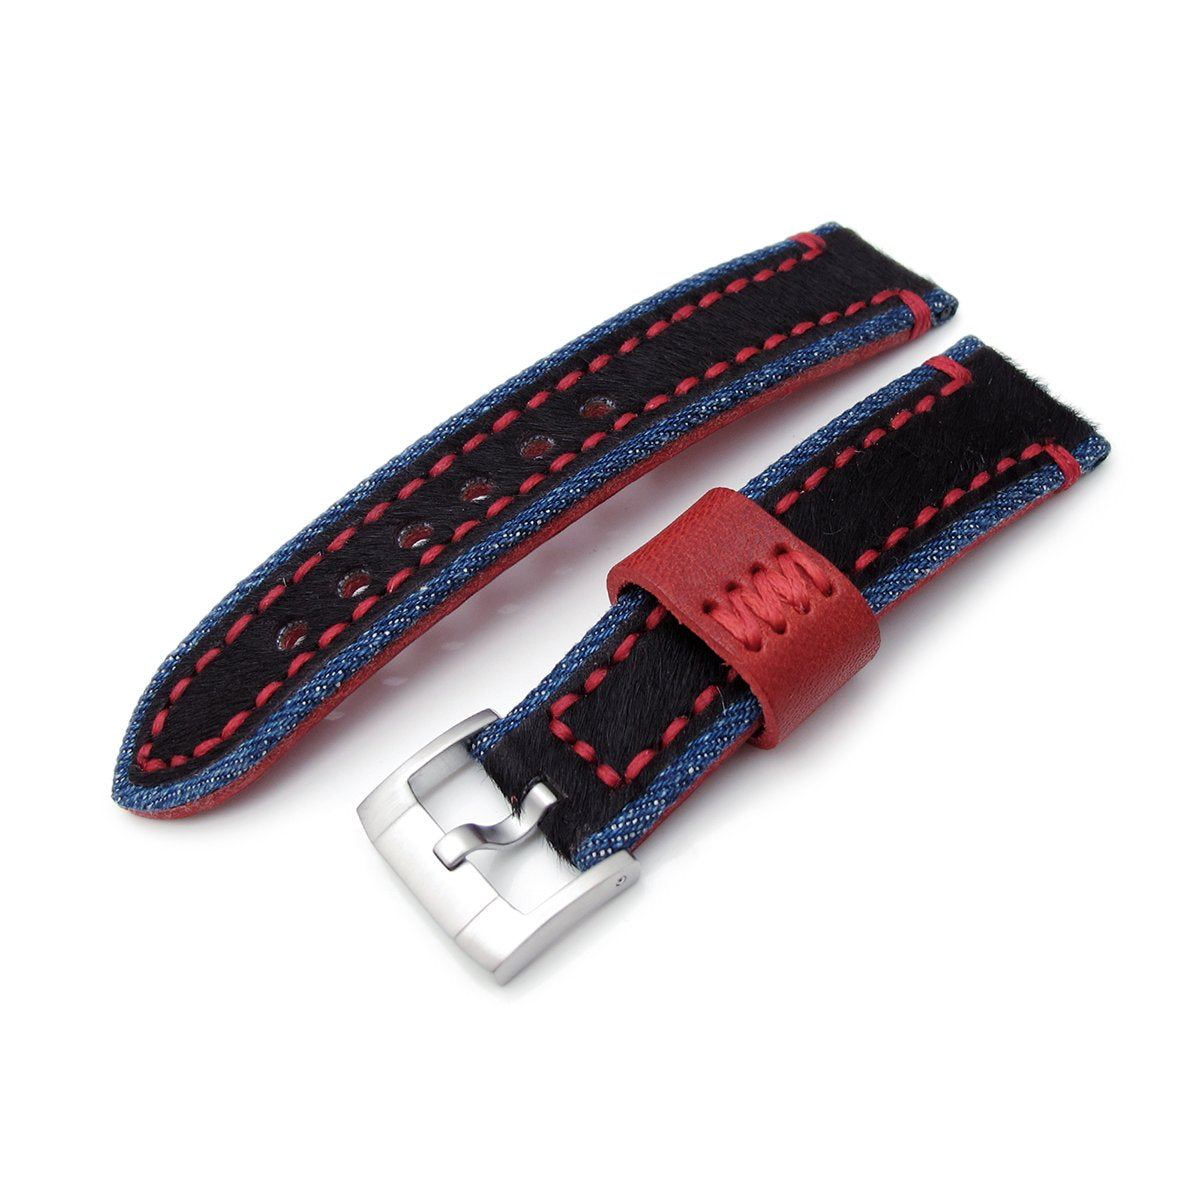 22mm MiLTAT Zizz Collection Brown Fur &amp; Calf Watch Strap Red Wax Hand Stitching Strapcode Watch Bands